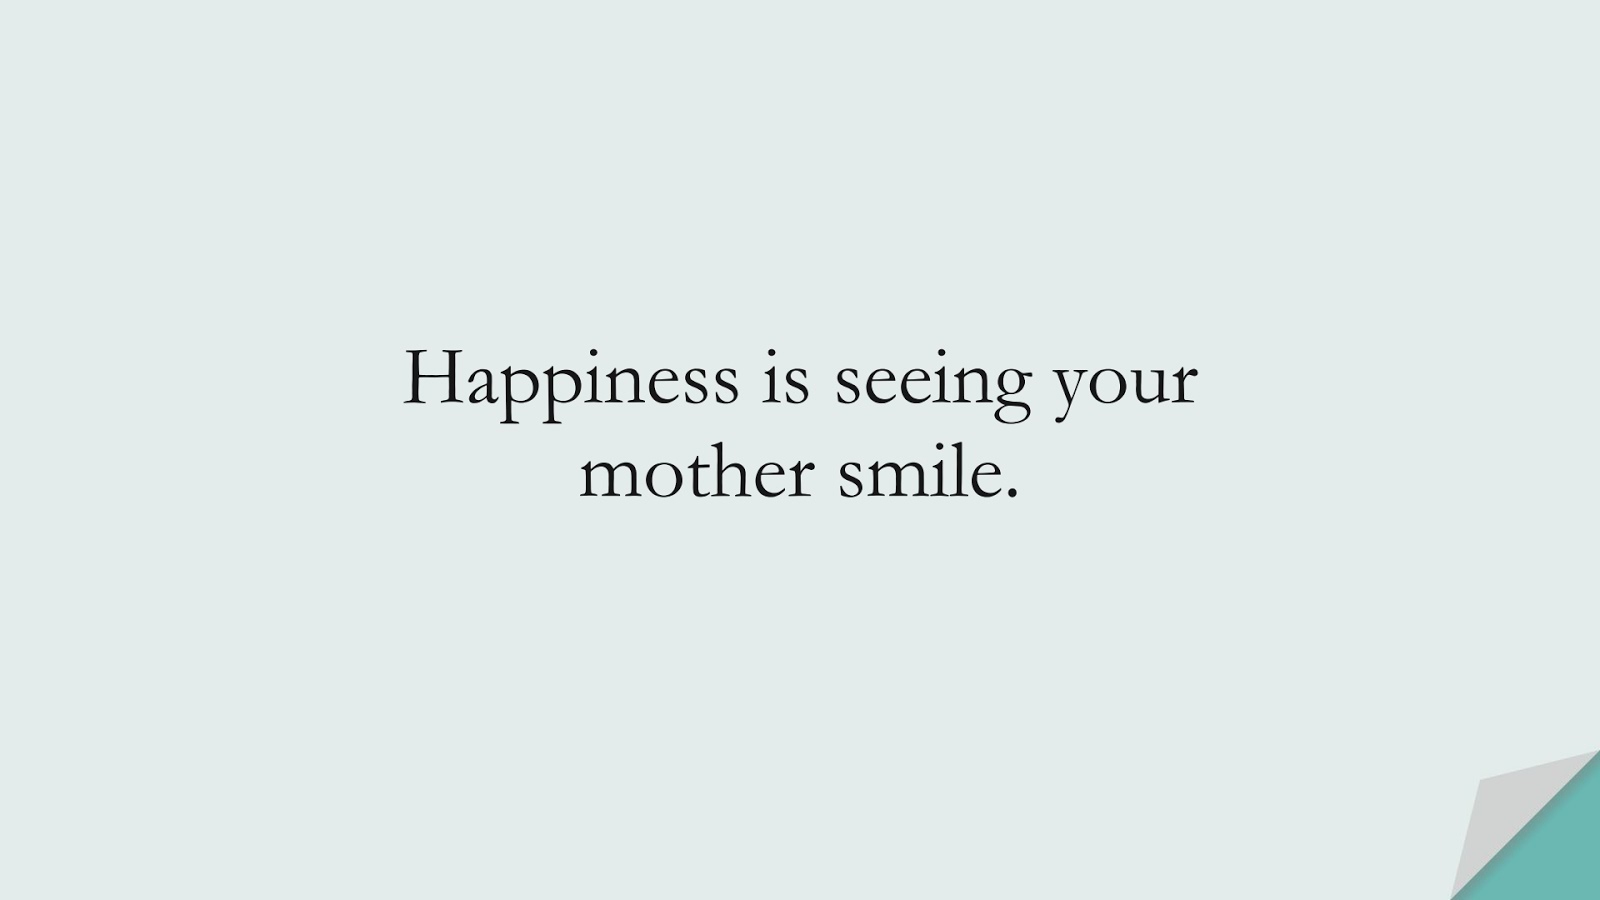 Happiness is seeing your mother smile.FALSE